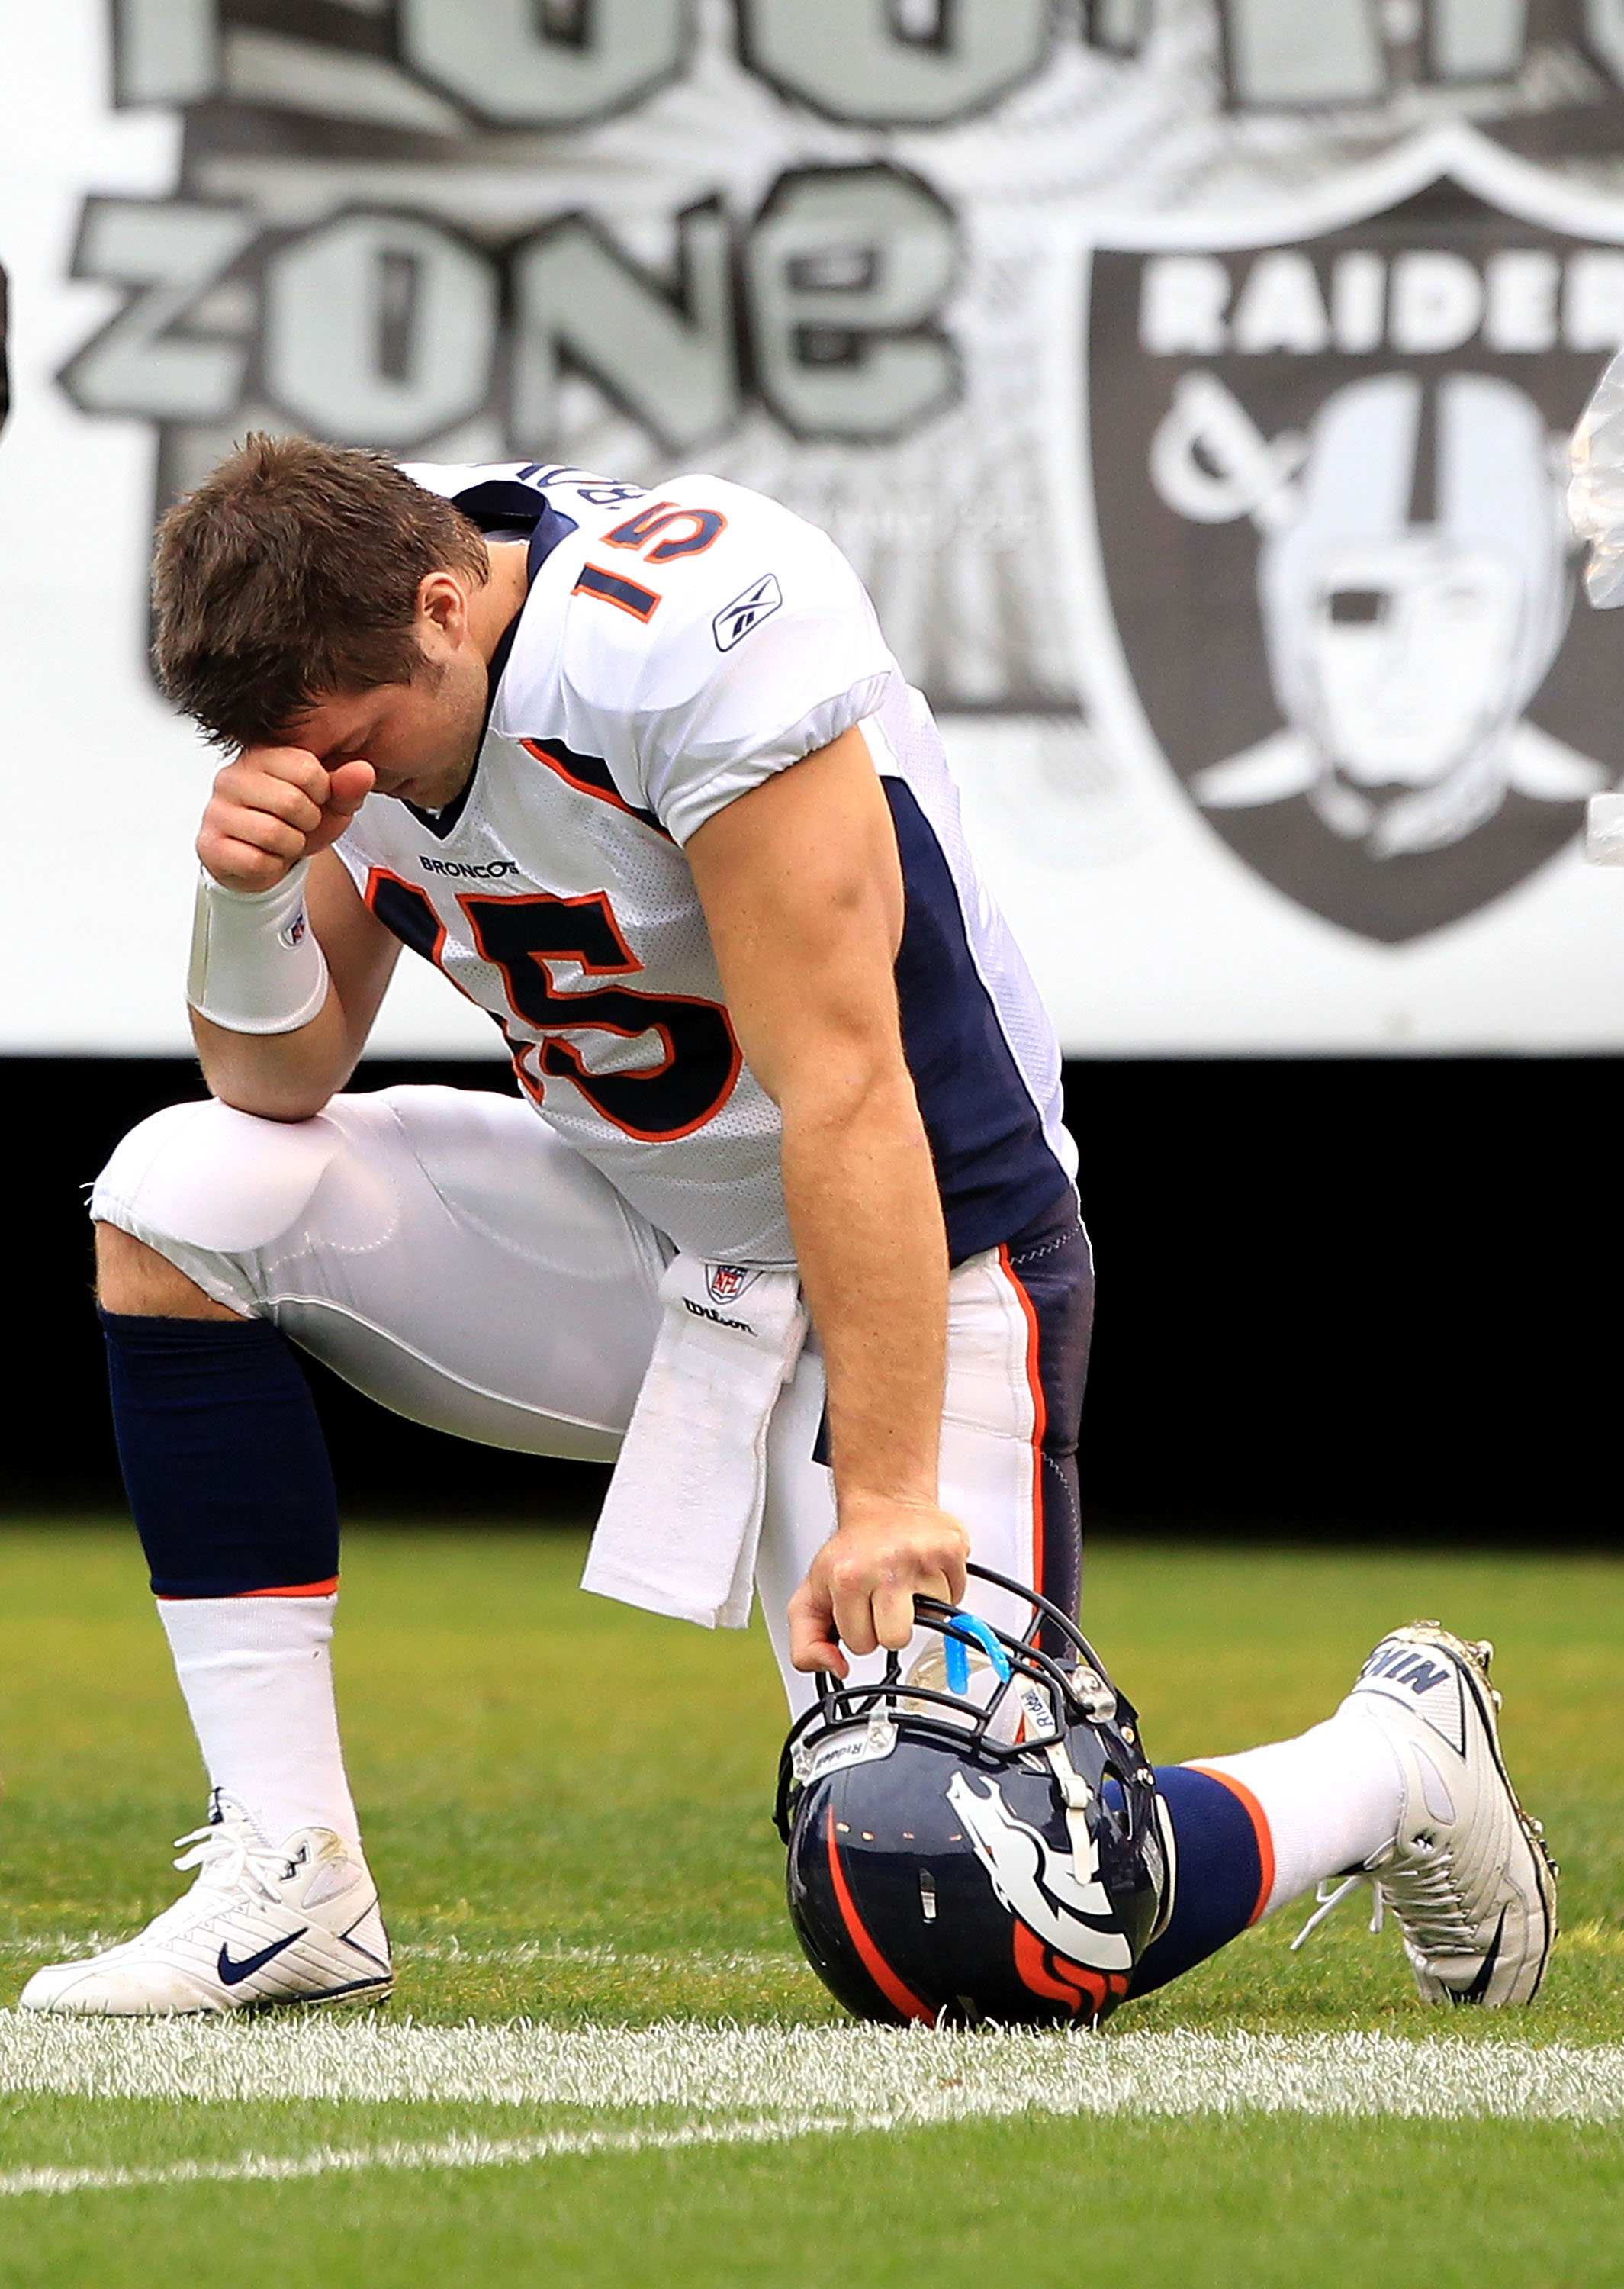 Binghamton can't get enough of Tim Tebow's second coming